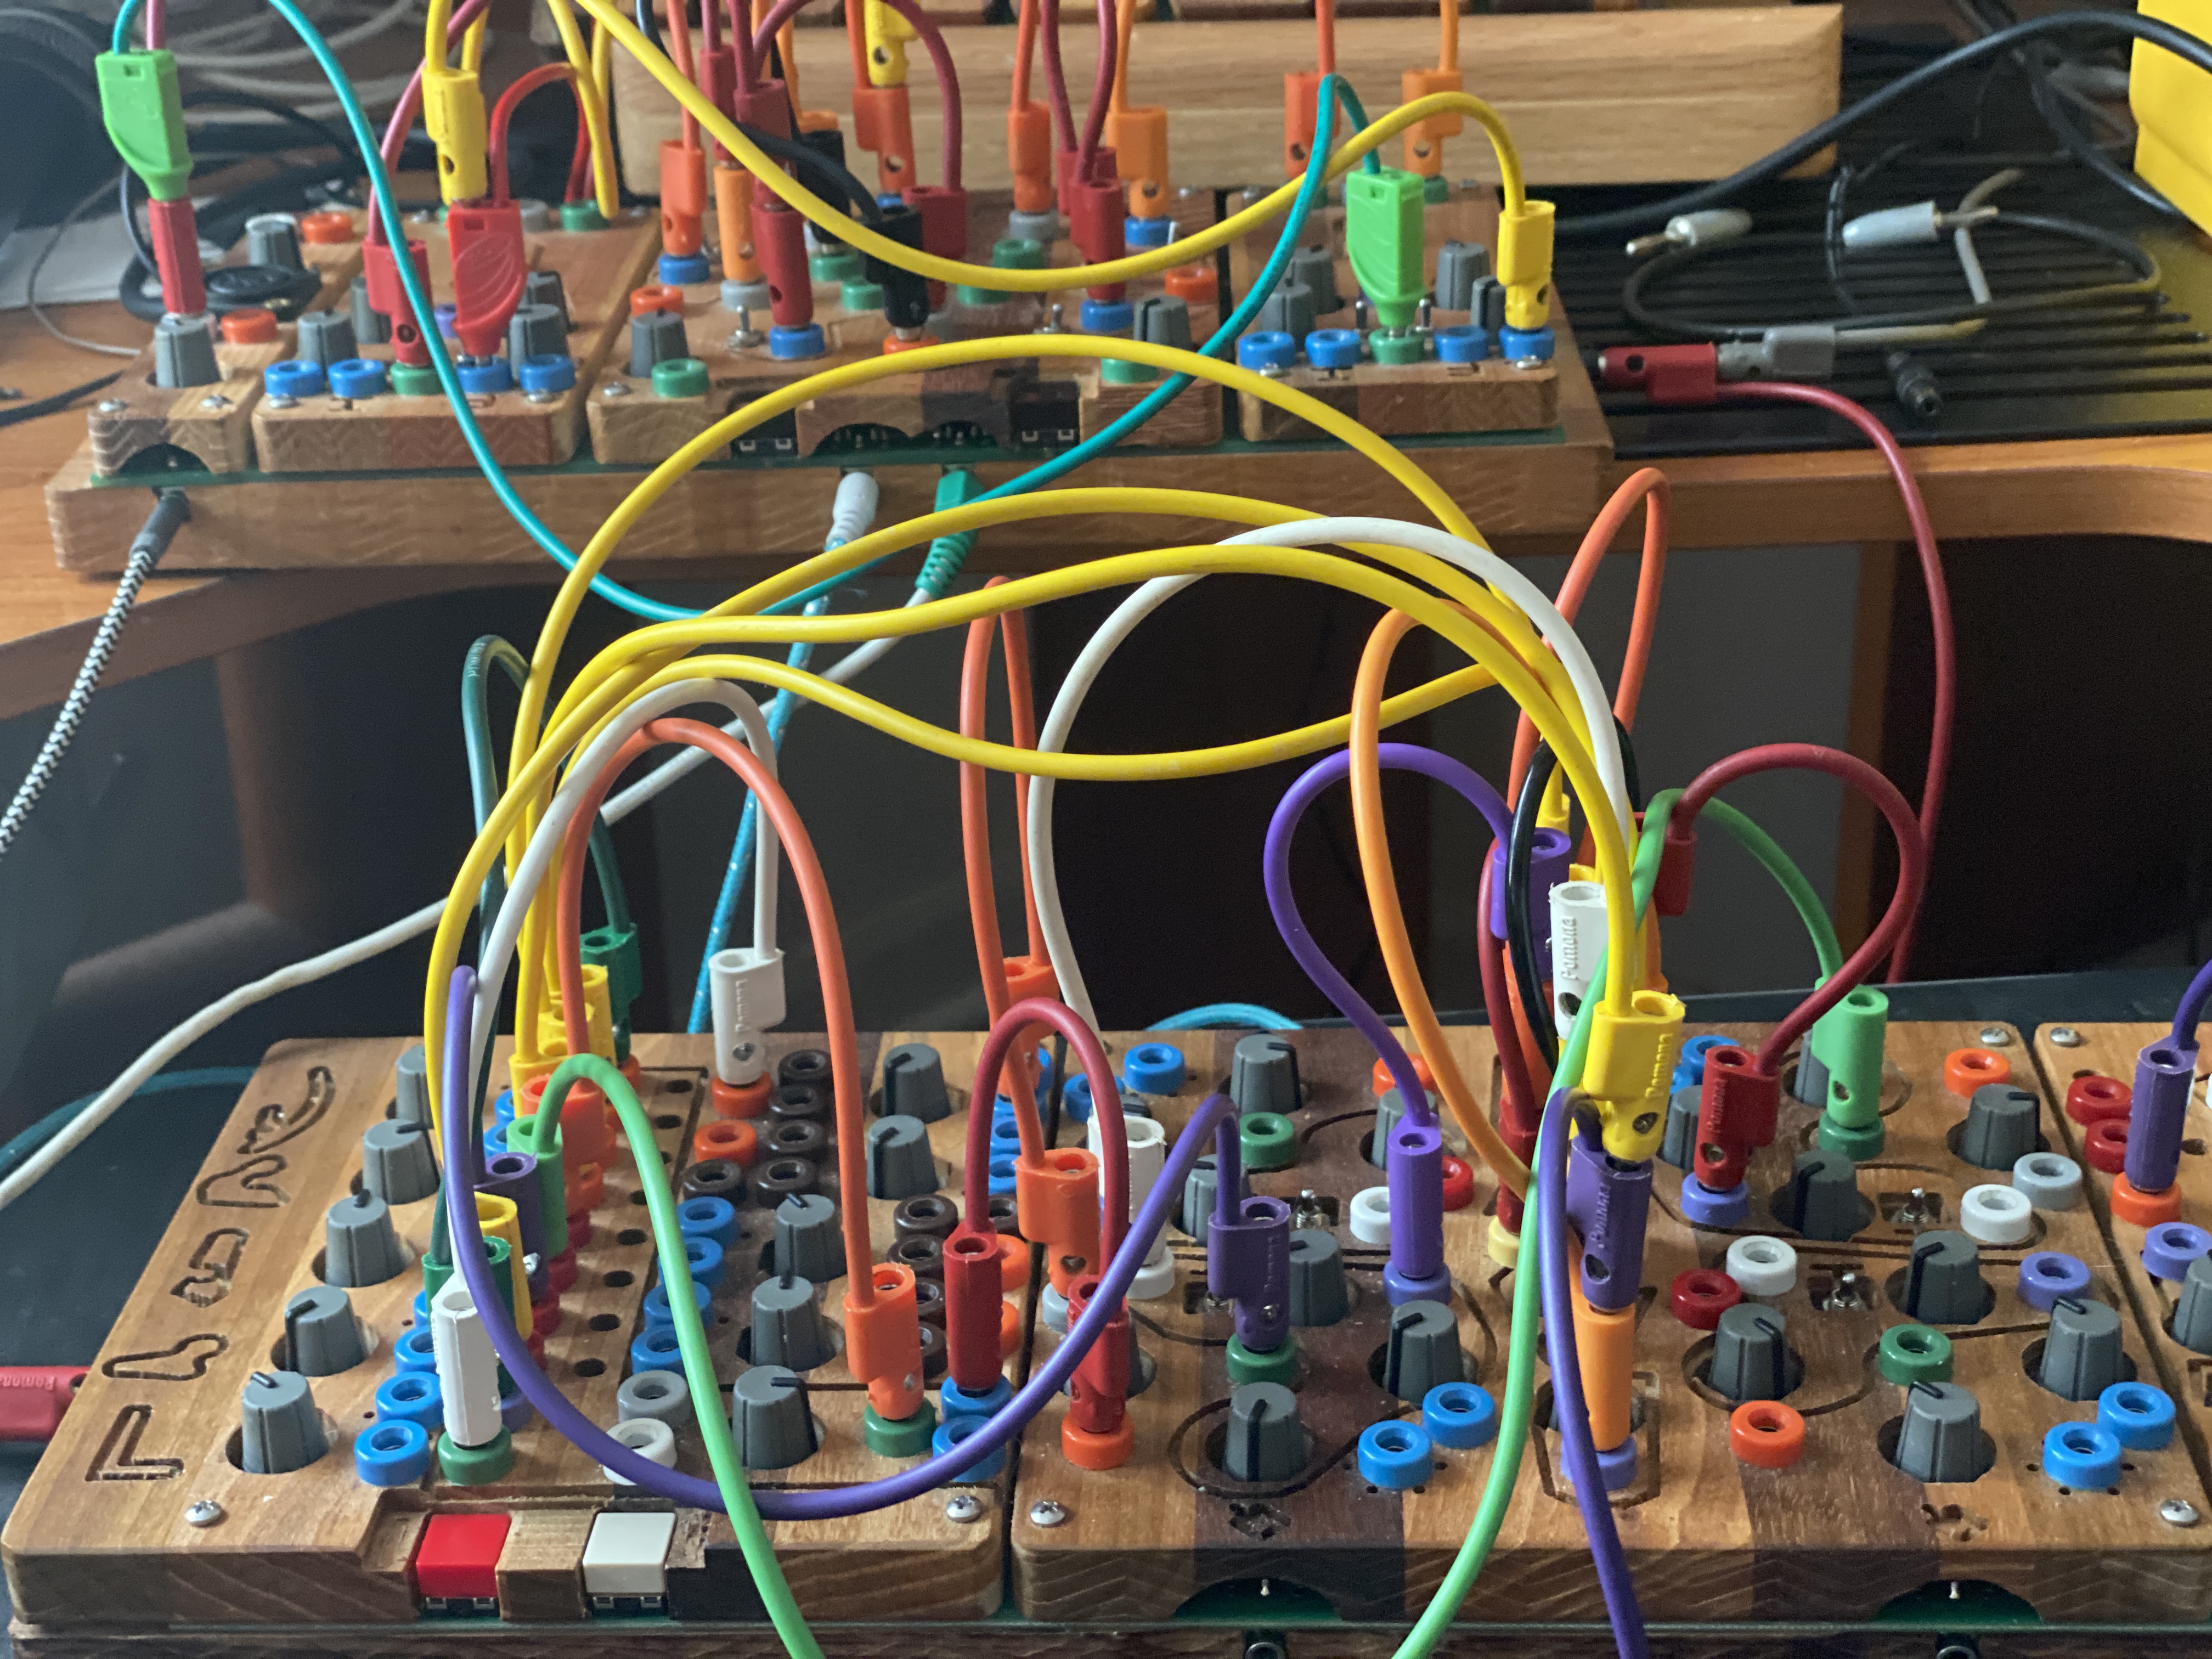 The Ciat-Lonbarde analog synthesizer will be one of many electronic and acoustic musical instruments performed at MYSTERIUM. Image courtesy of Craig Dongoski.